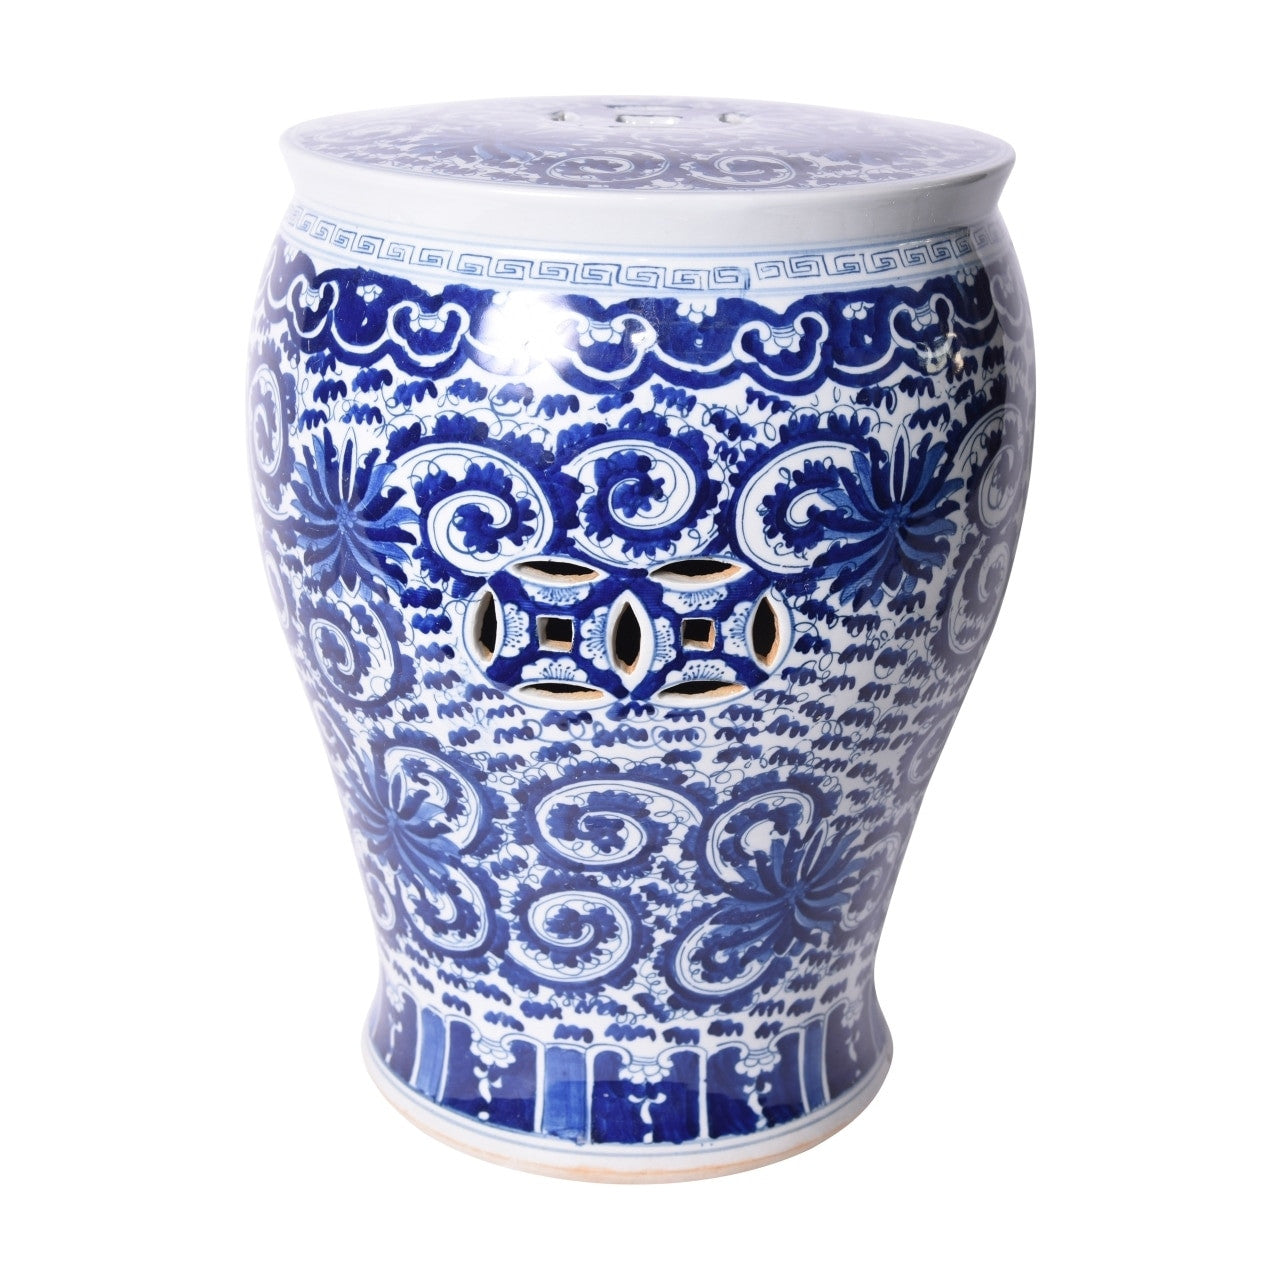 Blue and White Round Flat Top Garden Stool Twisted Lotus Motif